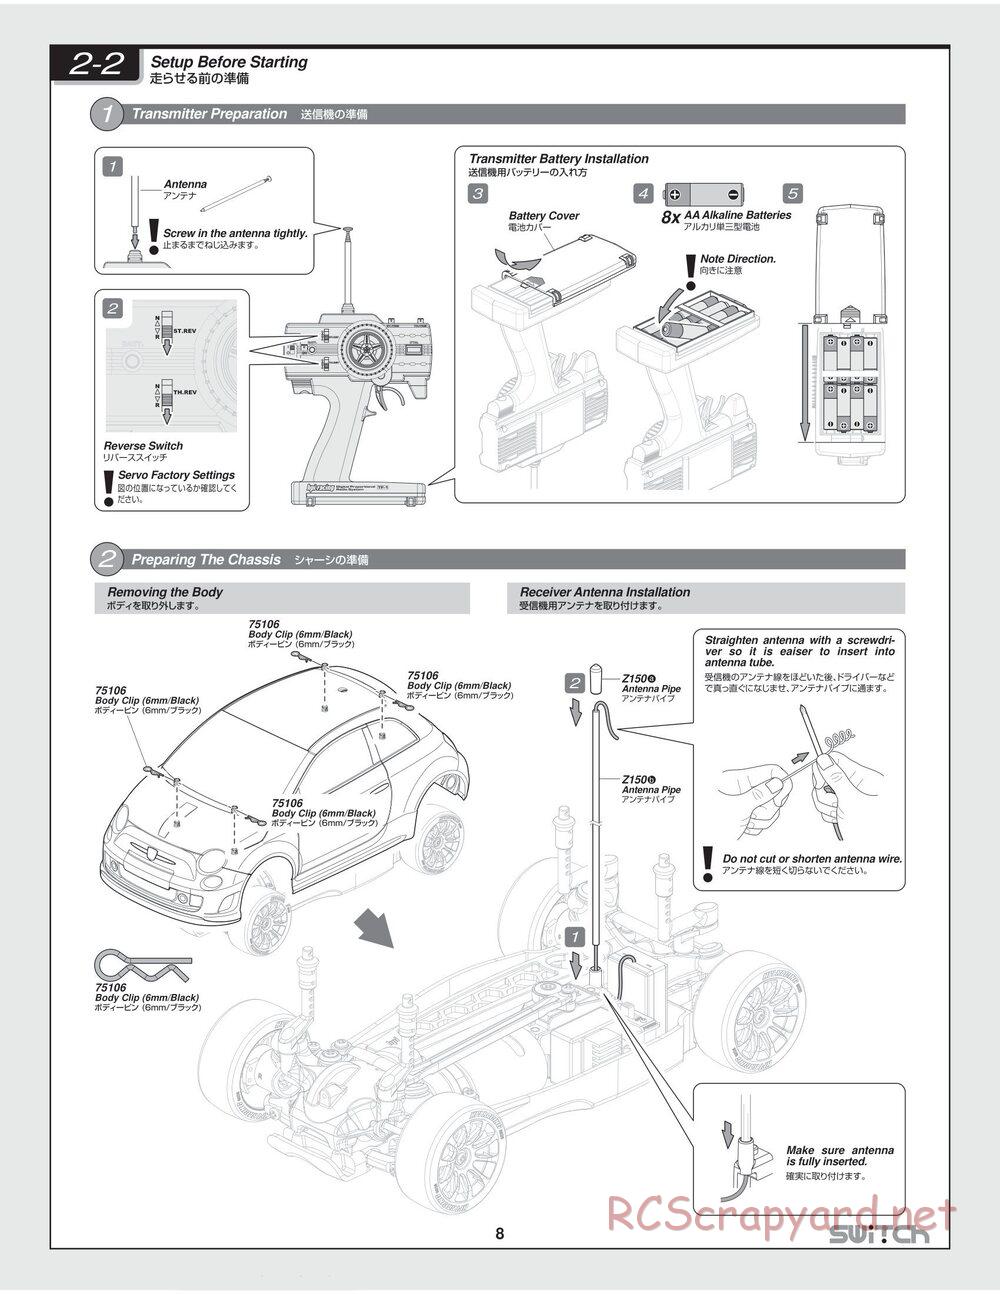 HPI - Switch - Manual - Page 8